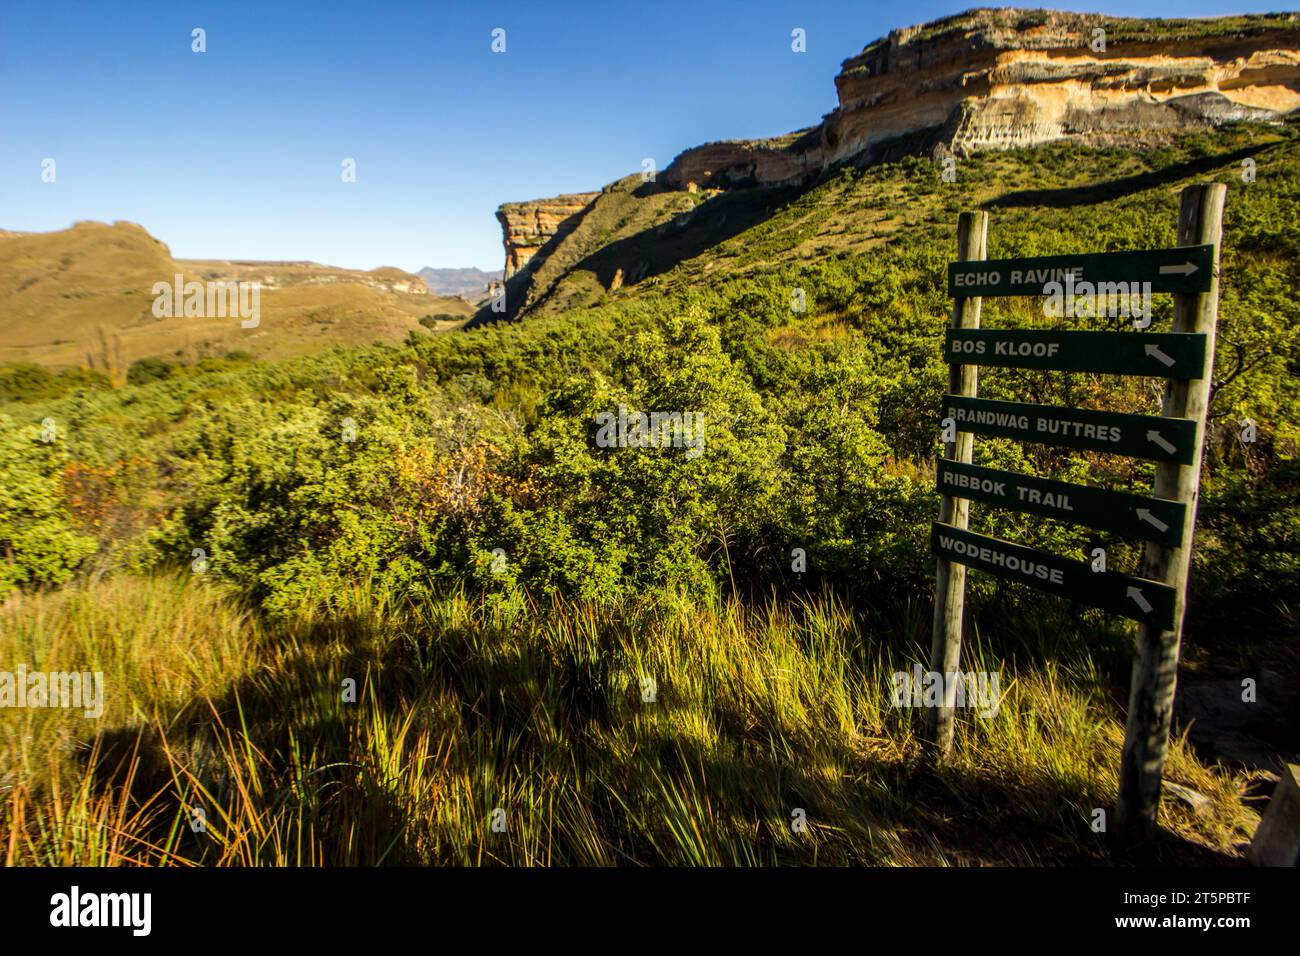 Signage of the different routes of the Golden Gate Highlands National Park of South Africa with its impressive scenery in the background. Stock Photo